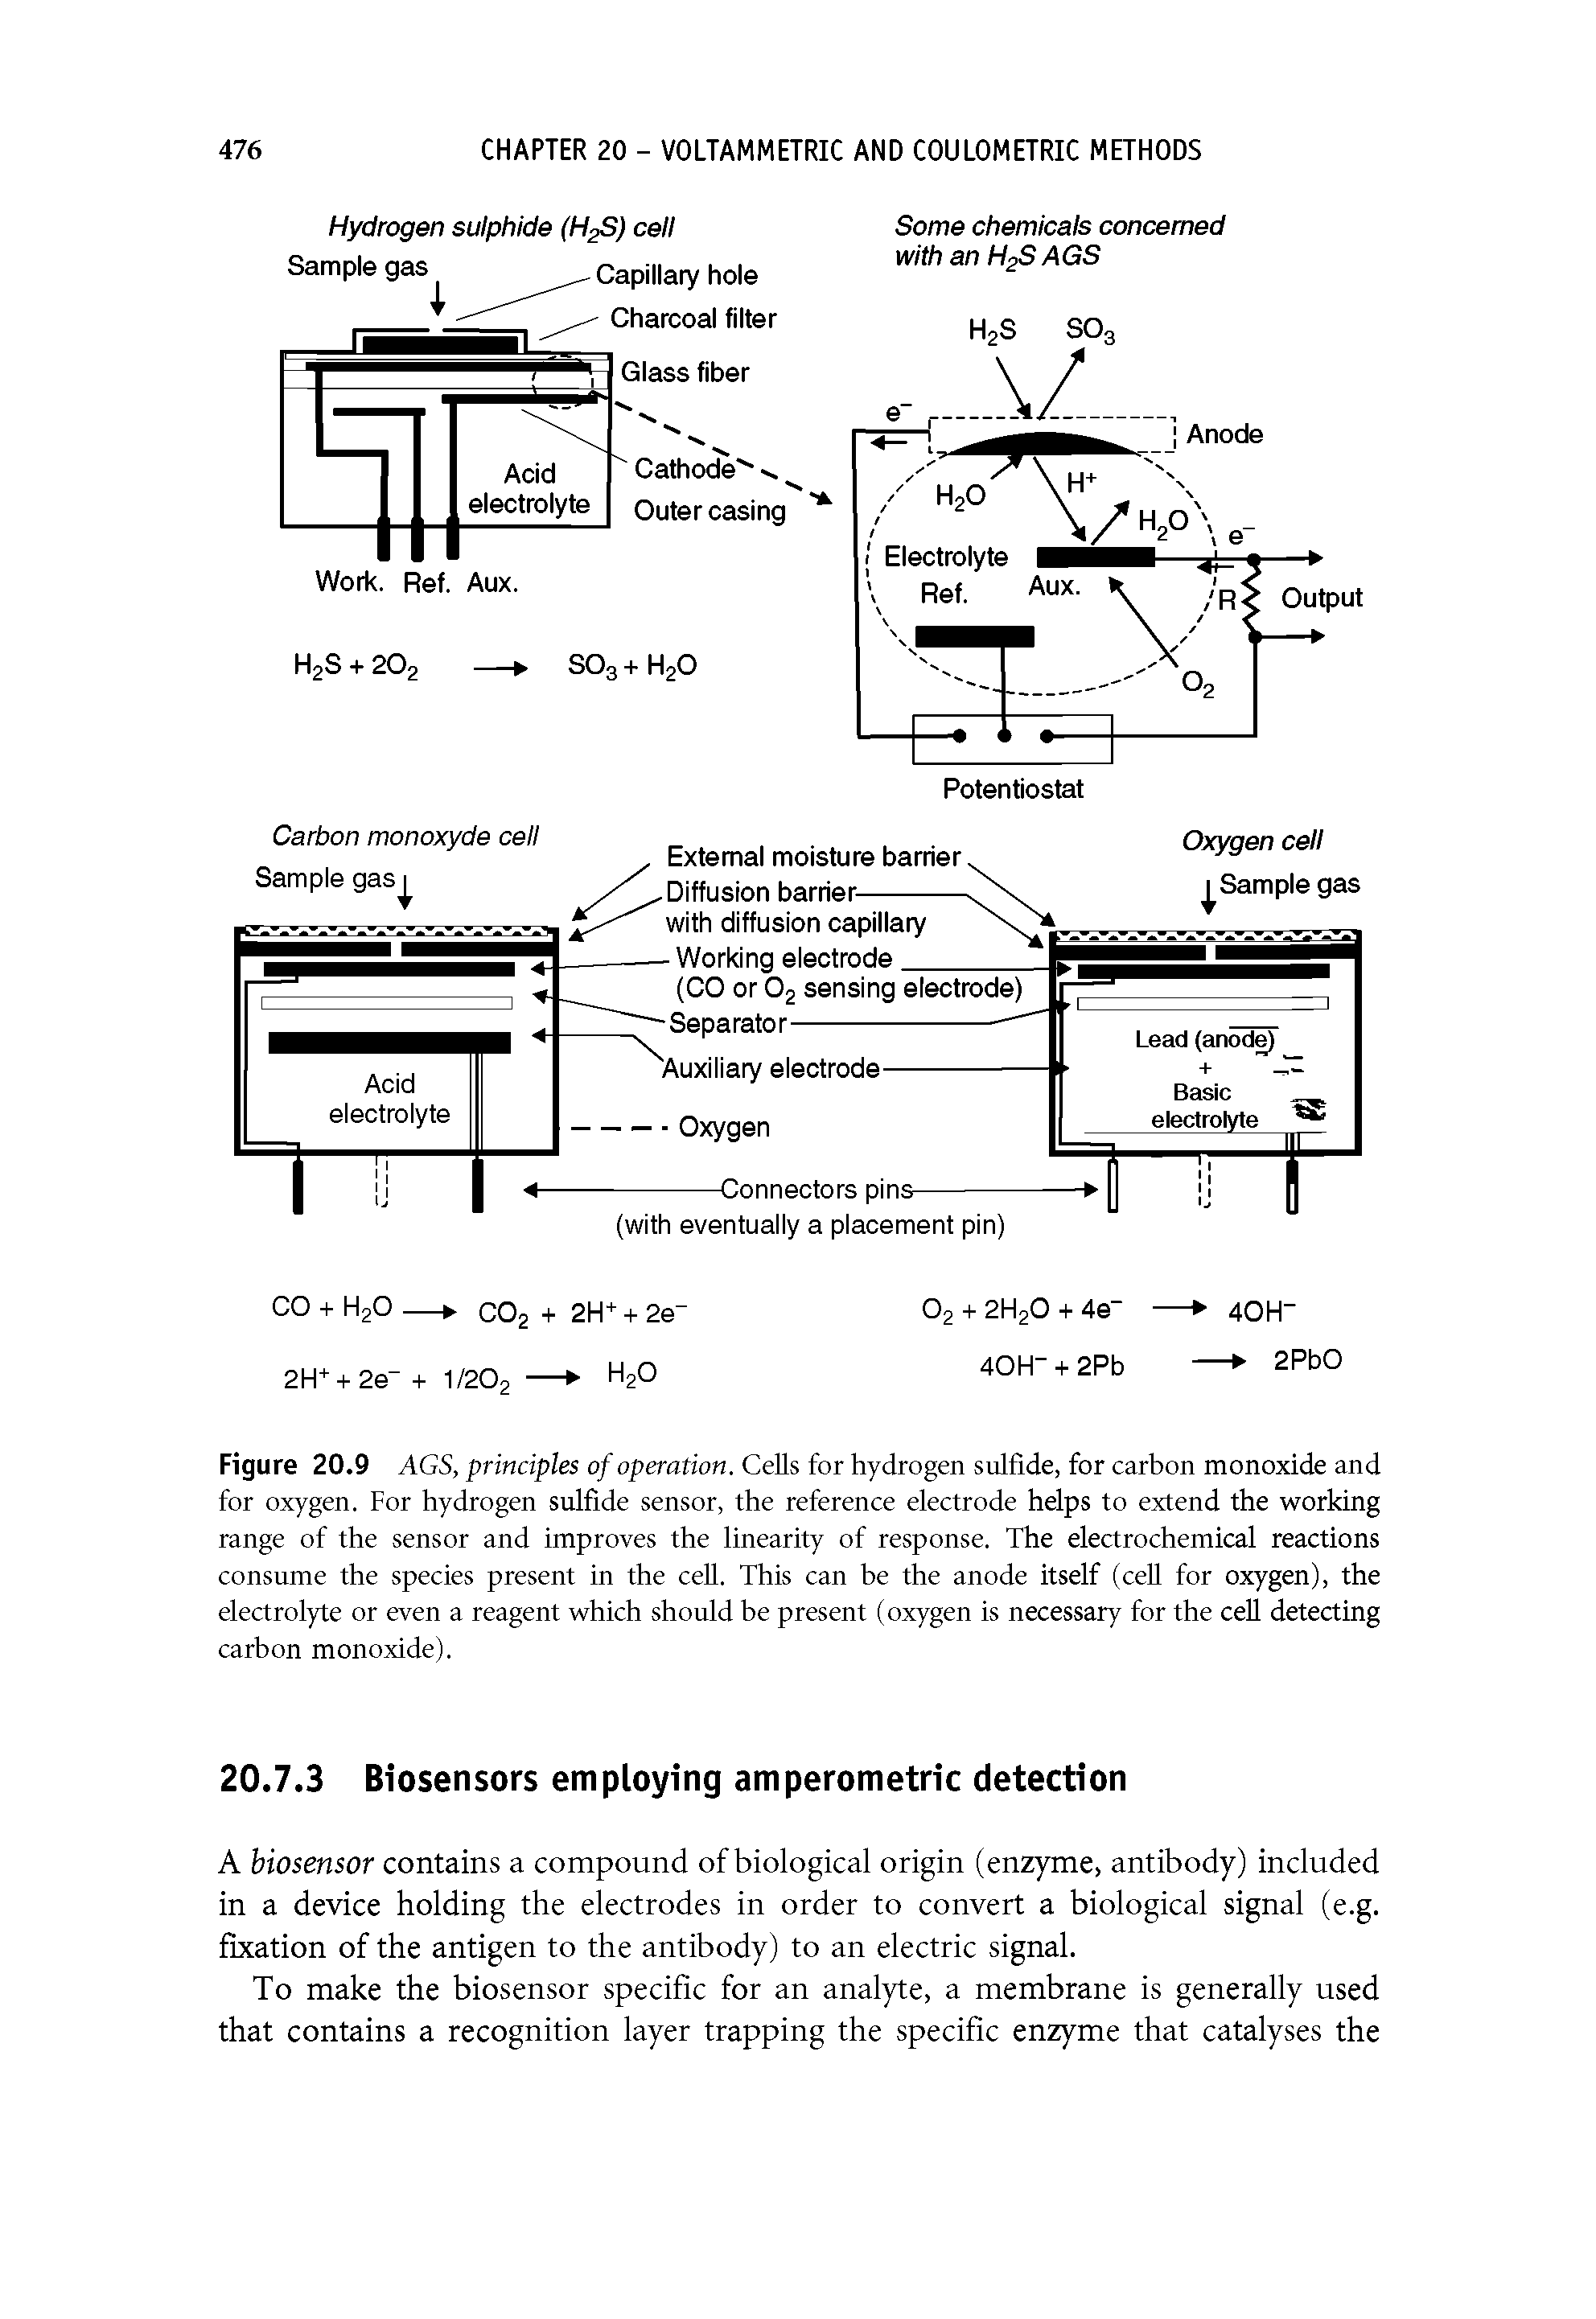 Figure 20.9 AGS, principles of operation. Cells for hydrogen sulfide, for carbon monoxide and for oxygen. For hydrogen sulfide sensor, the reference electrode helps to extend the working range of the sensor and improves the linearity of response. The electrochemical reactions consume the species present in the cell. This can be the anode itself (cell for oxygen), the electrolyte or even a reagent which should be present (oxygen is necessary for the cell detecting carbon monoxide).